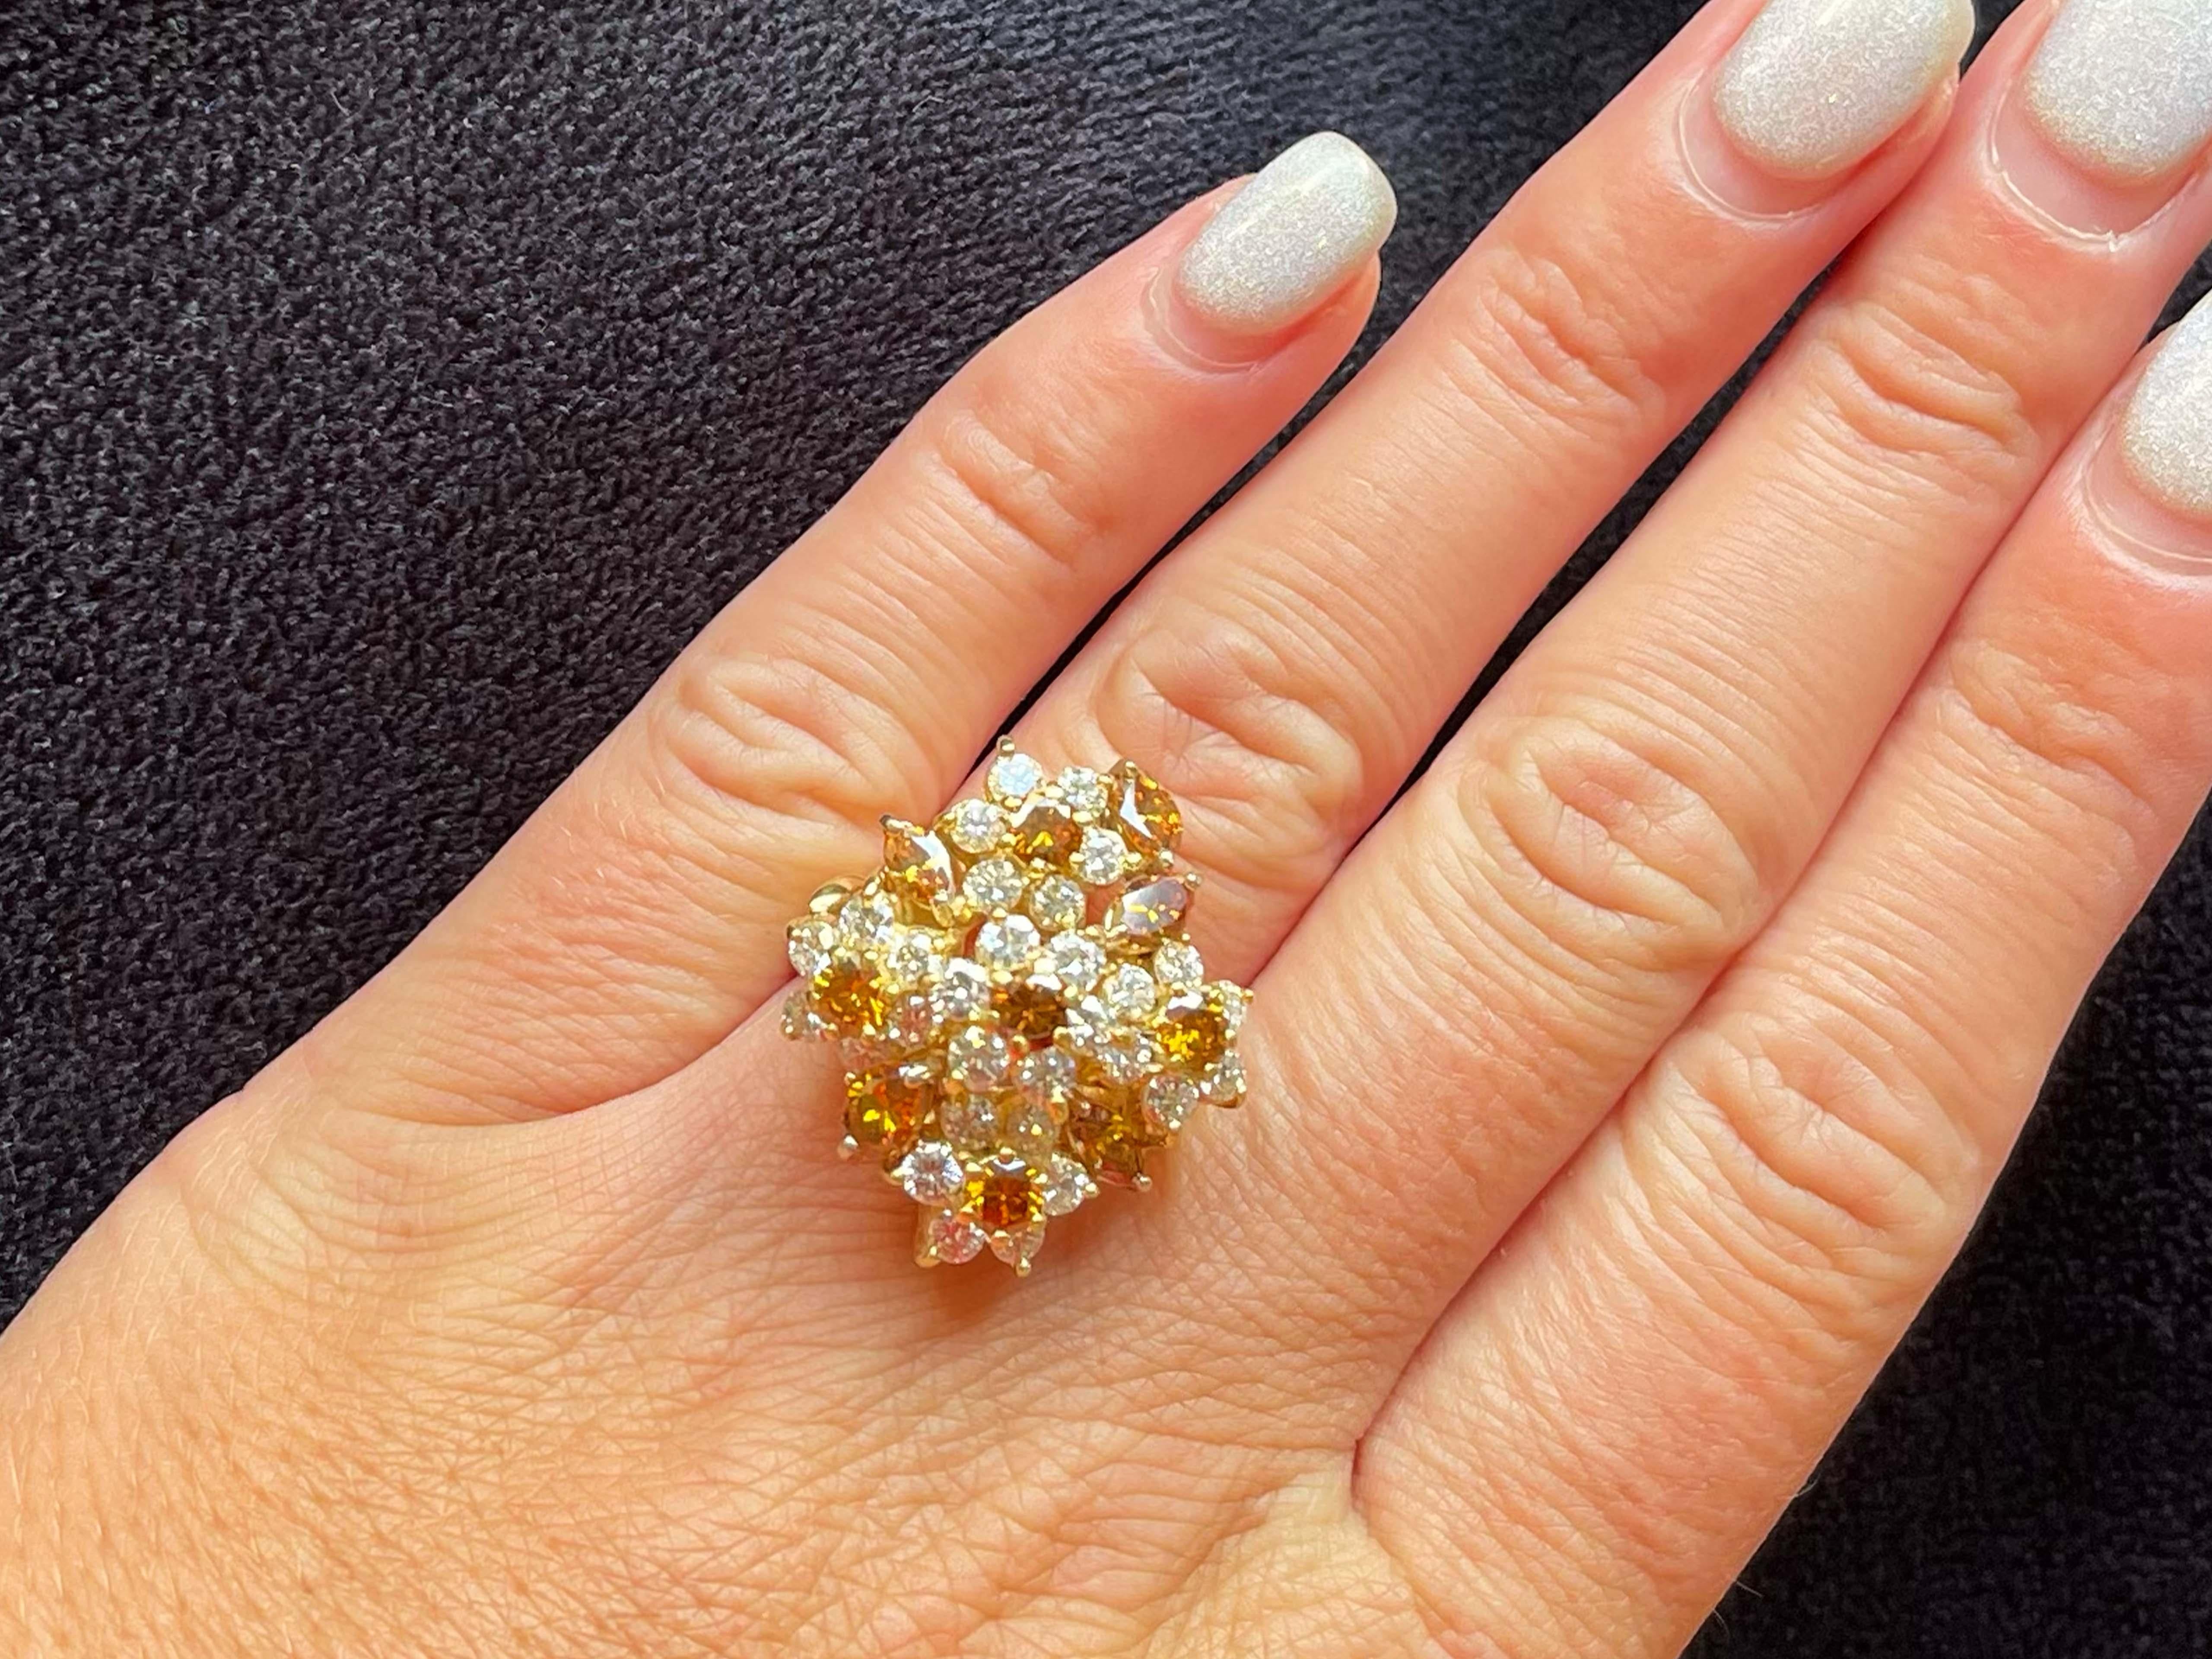 This magnificent floral bouquet of Diamonds designed by Terrel & Zimmelman is just stunning. The ring design features five flowers, each containing 6 round brilliant white diamonds with a natural vivid cognac orange diamond in the center, scattered